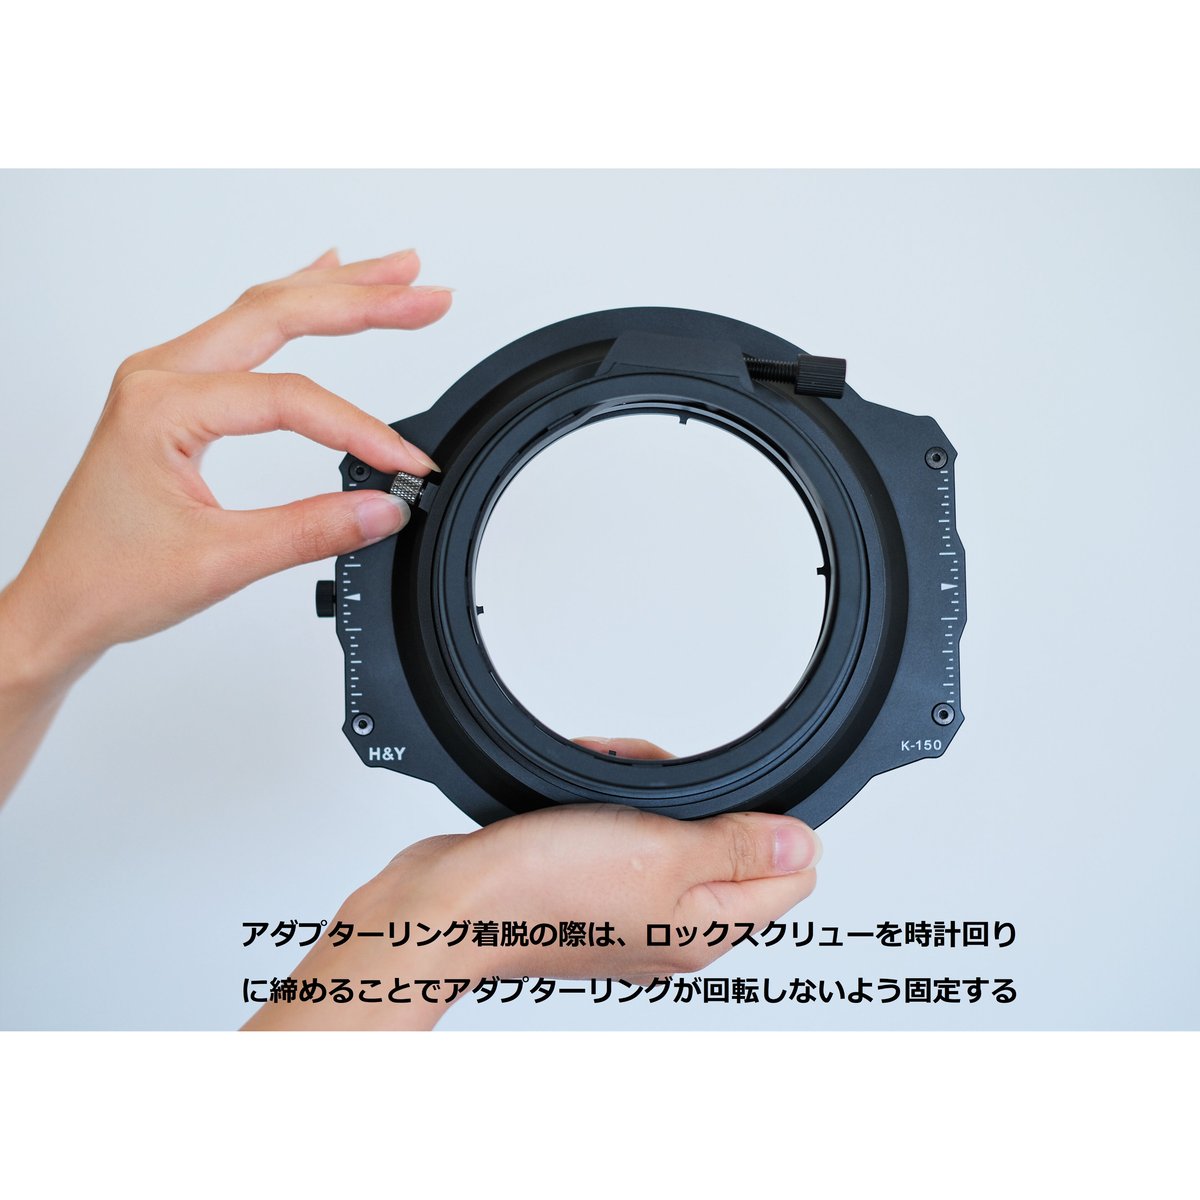 150mm Adapter Ring for 82mm lenses | H&Y Filter...